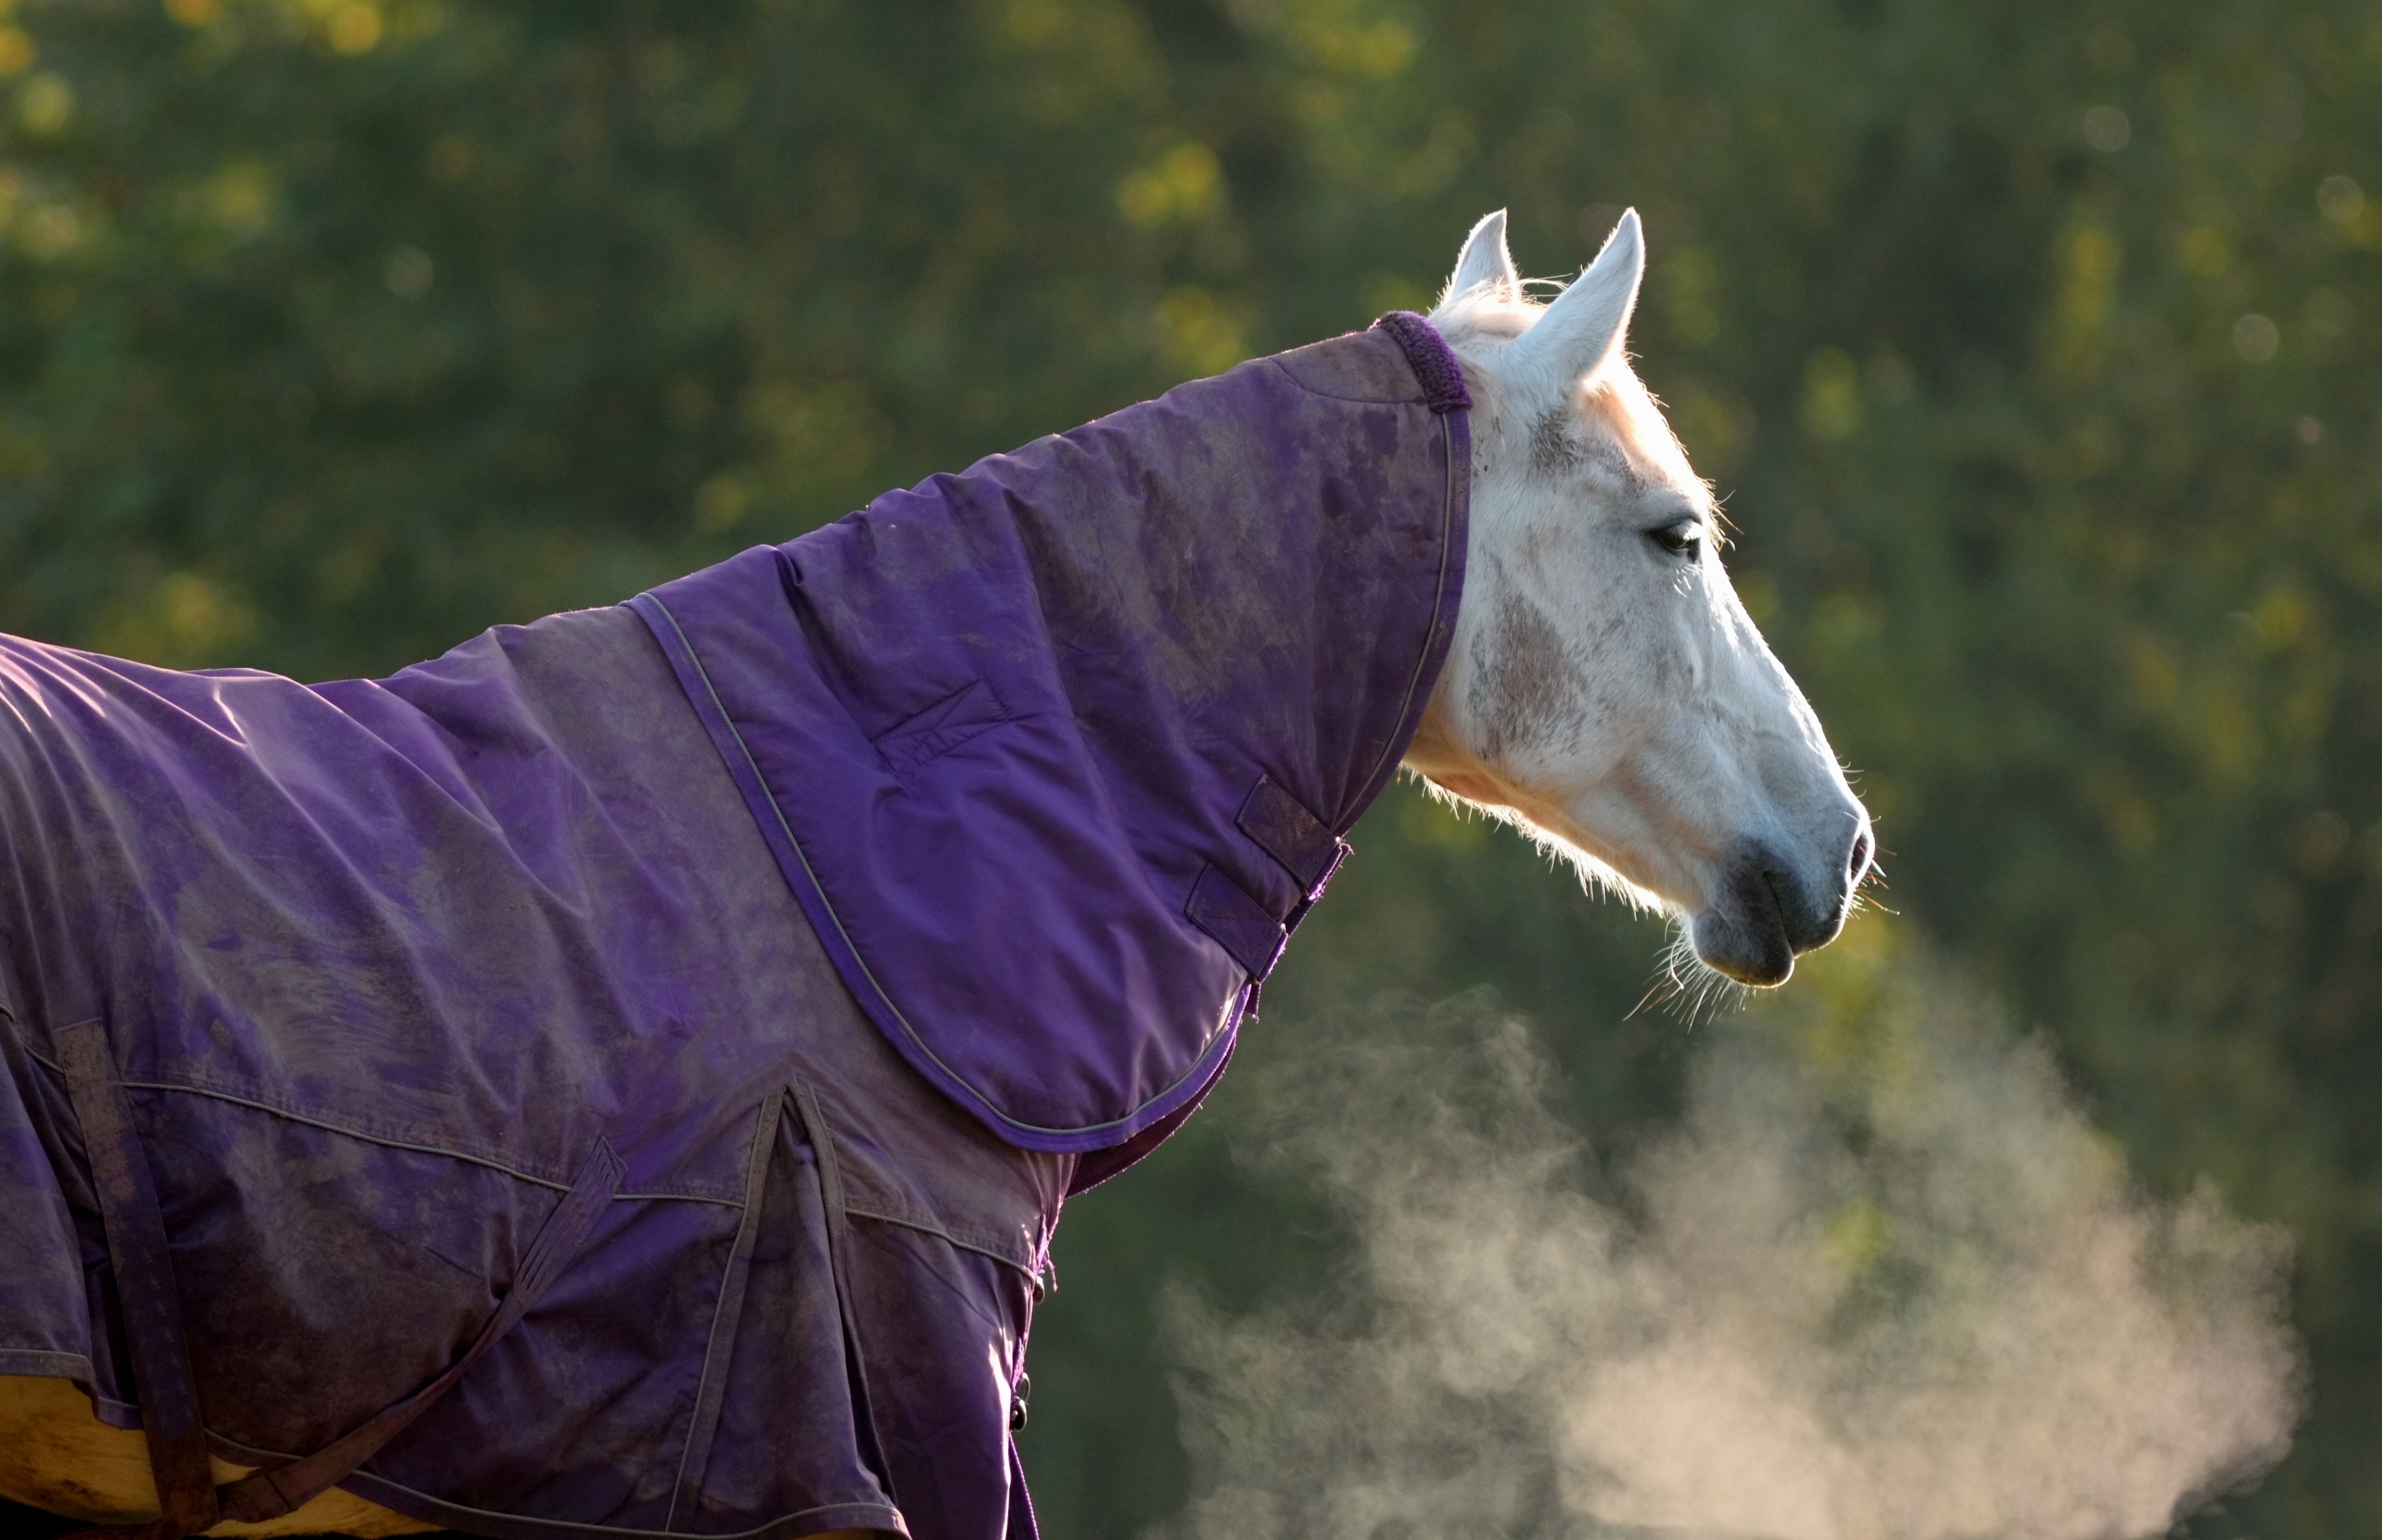 5 questions to ask about your horse's blanket